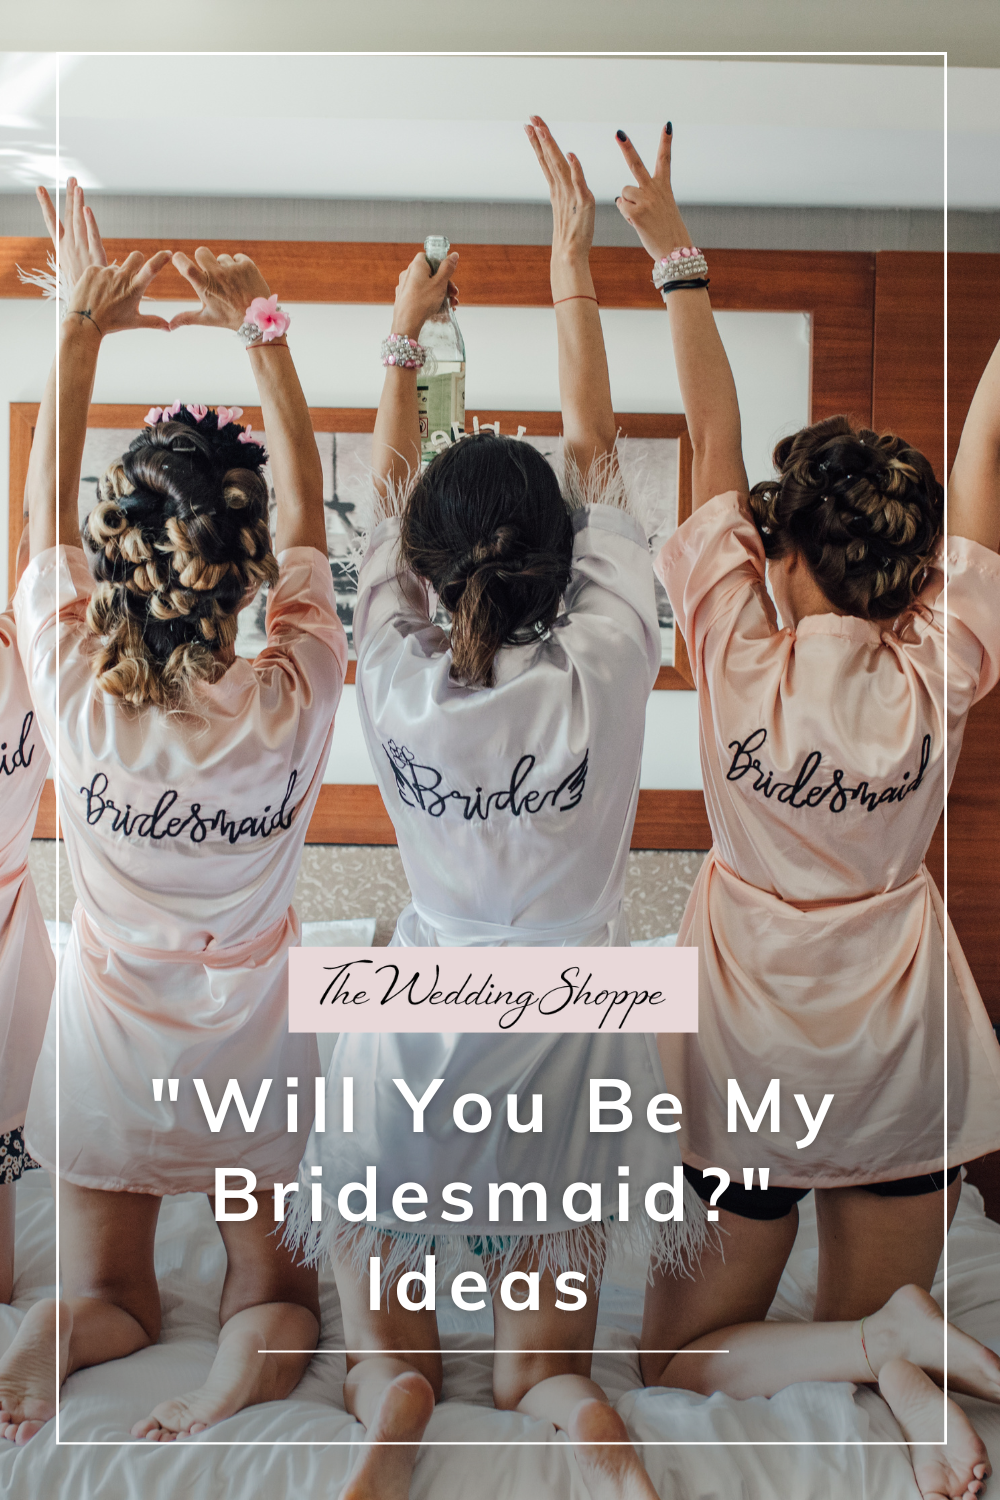 blog post graphic for "'Will You Be My Bridesmaid?' Ideas" from The Wedding Shoppe